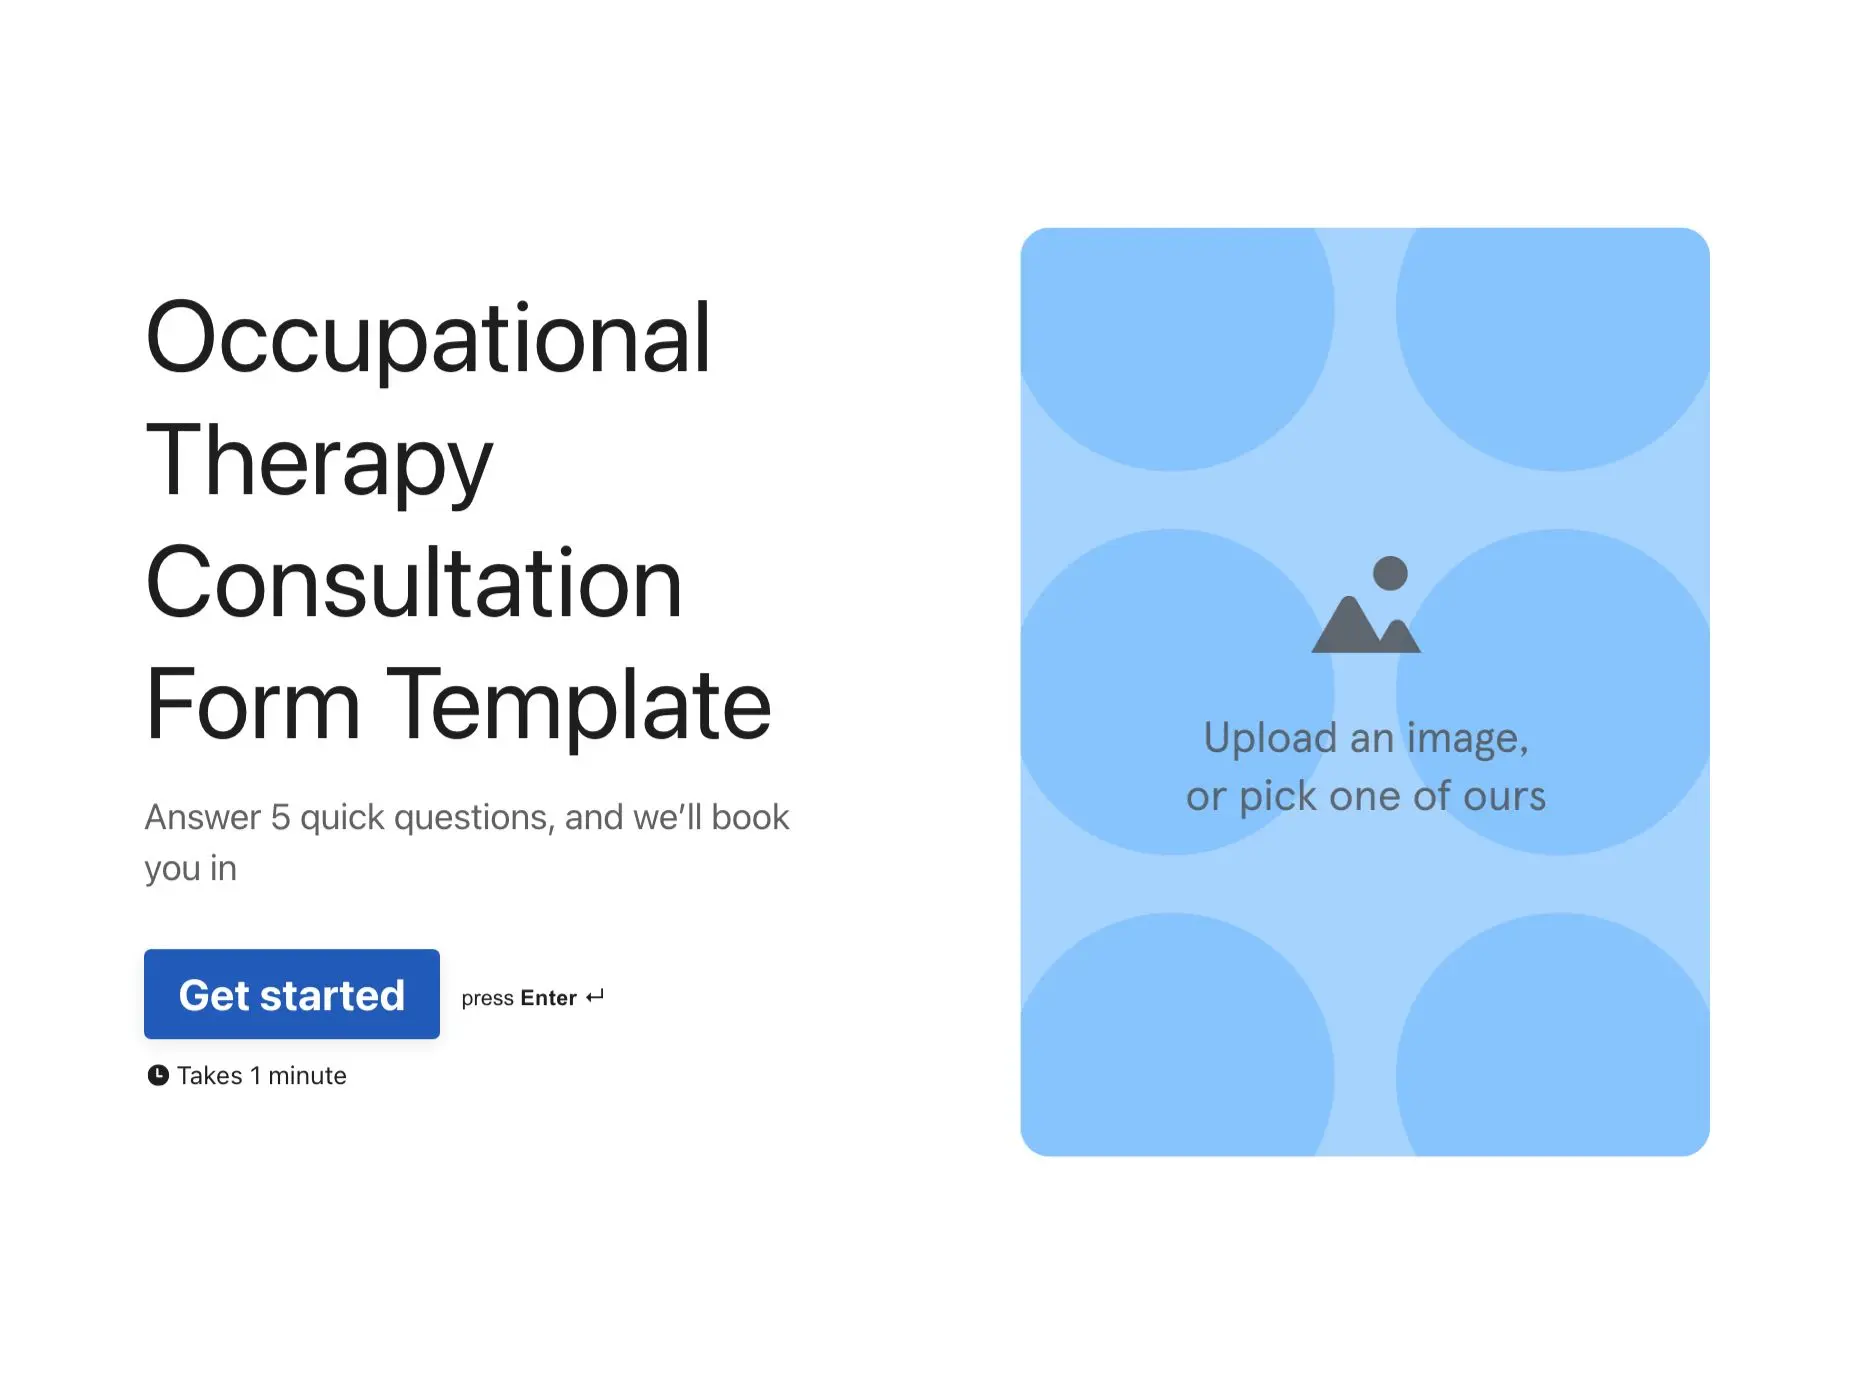 Occupational Therapy Consultation Form Template Hero